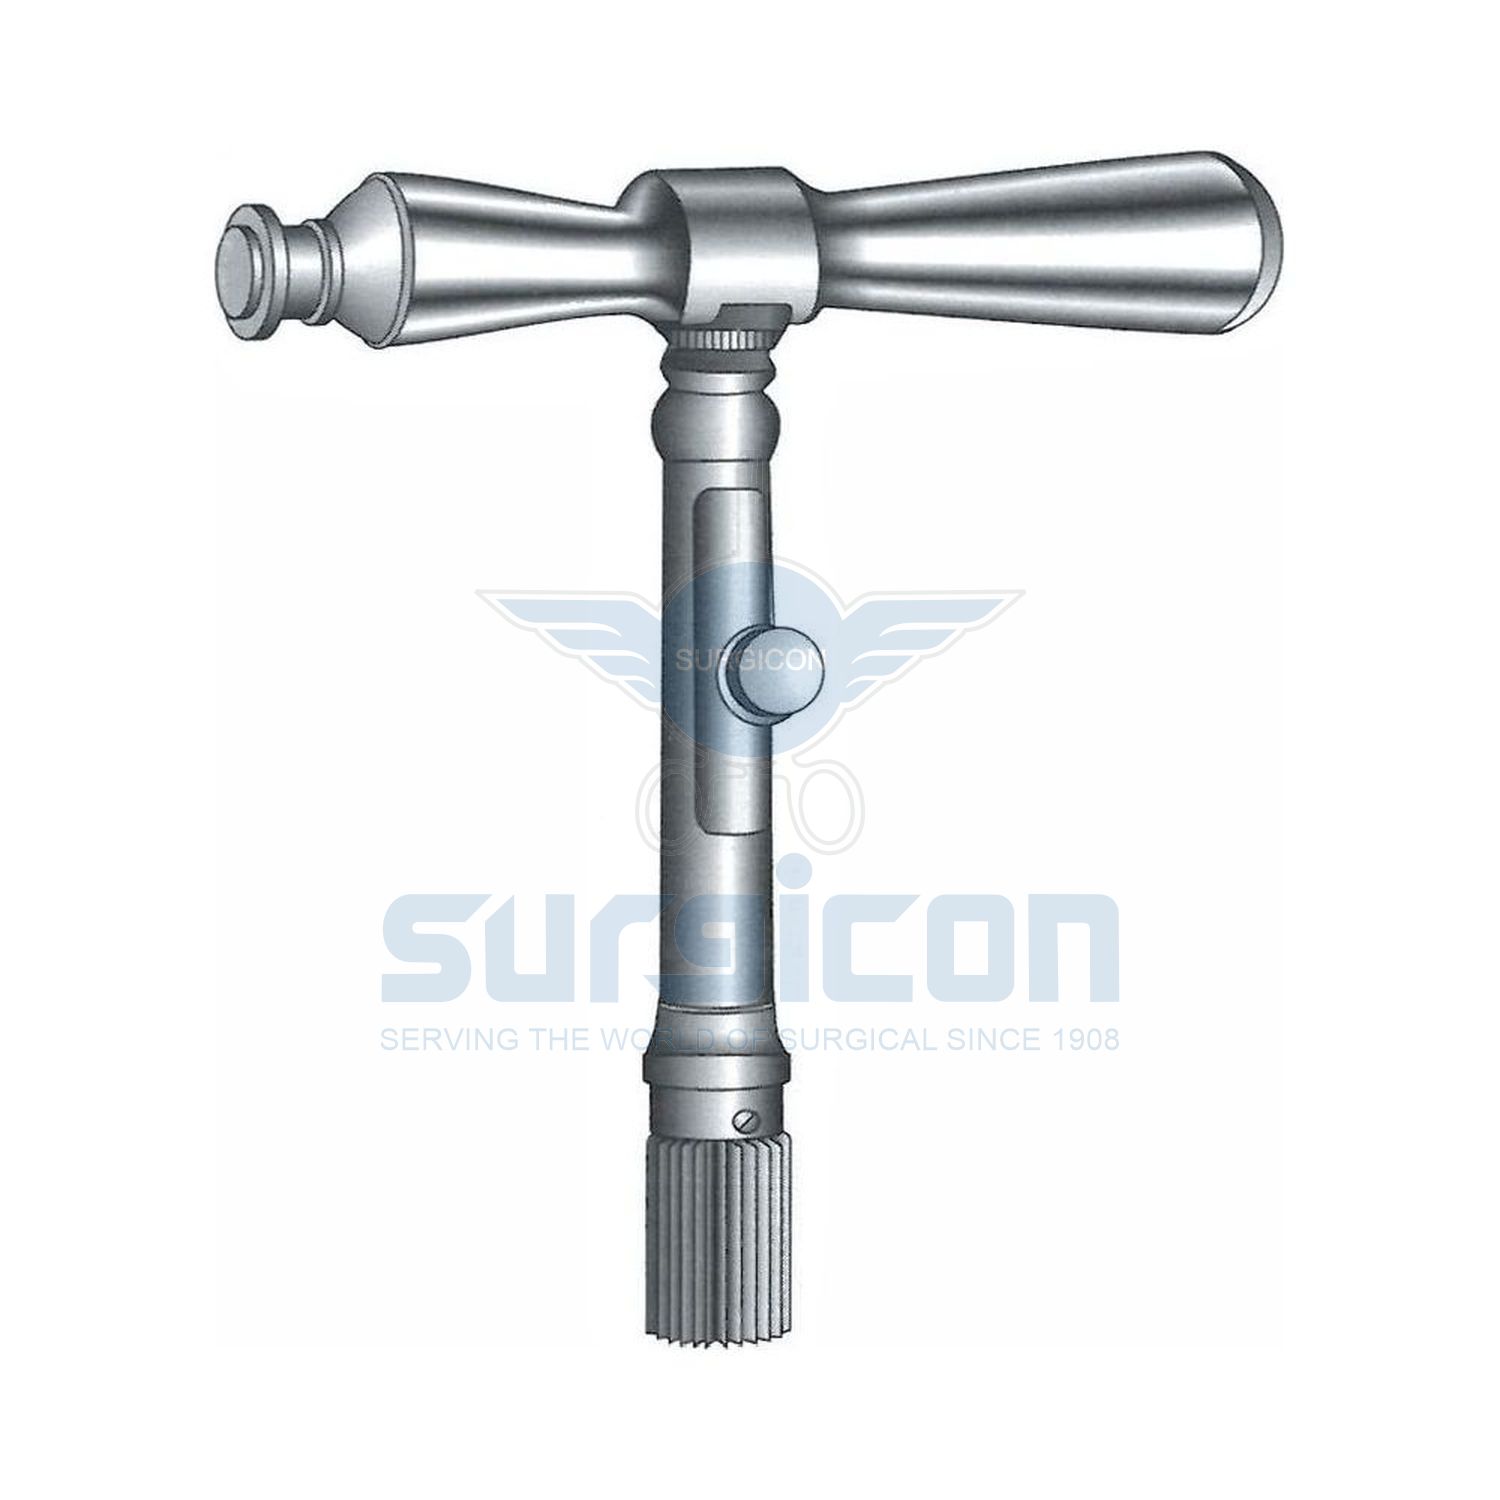 Hudson-Cervical-Traction-Tongs-and-Drill-Point-J-25-053